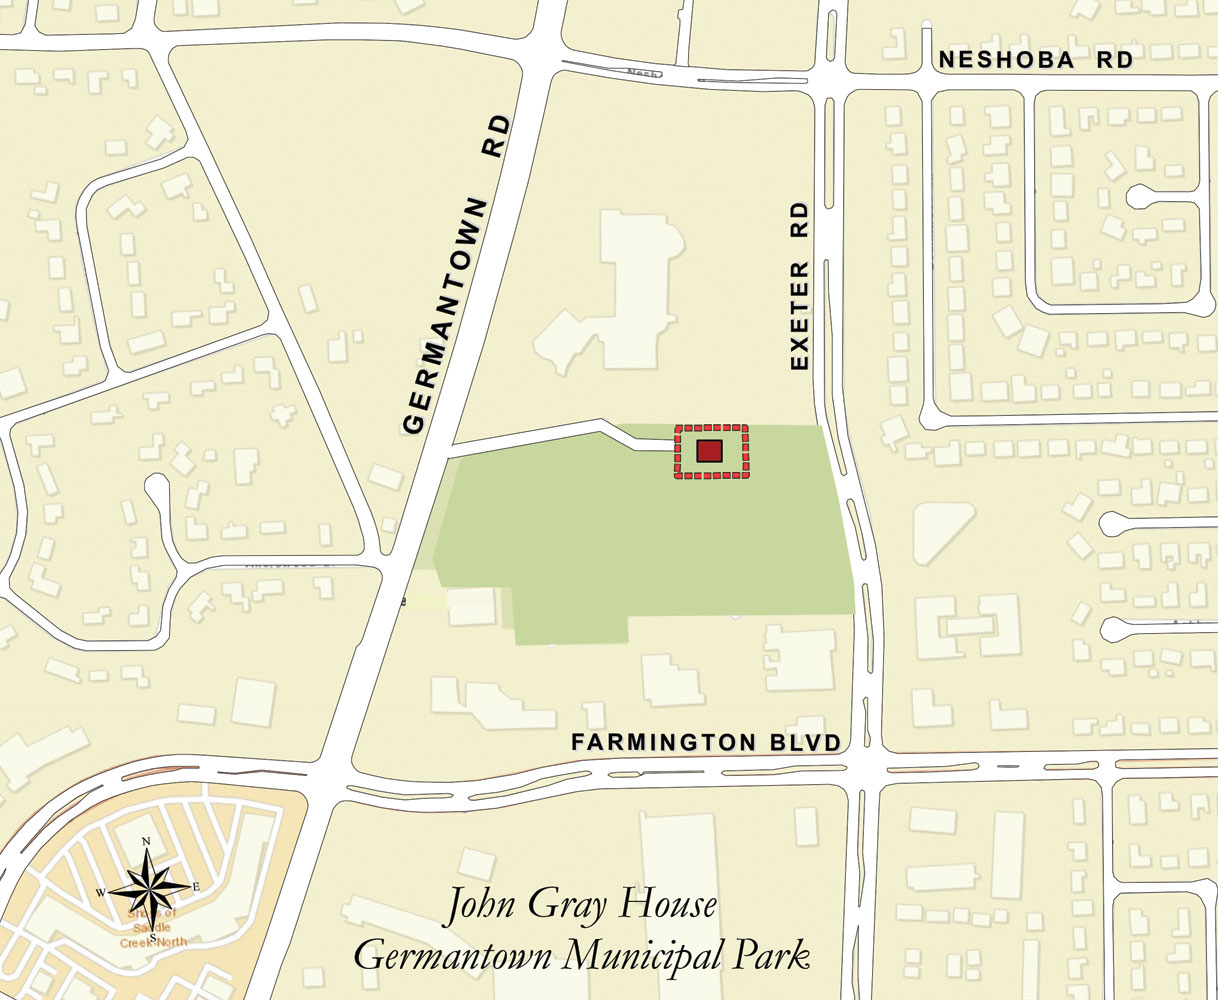 John Gray House located on Map of Germantown